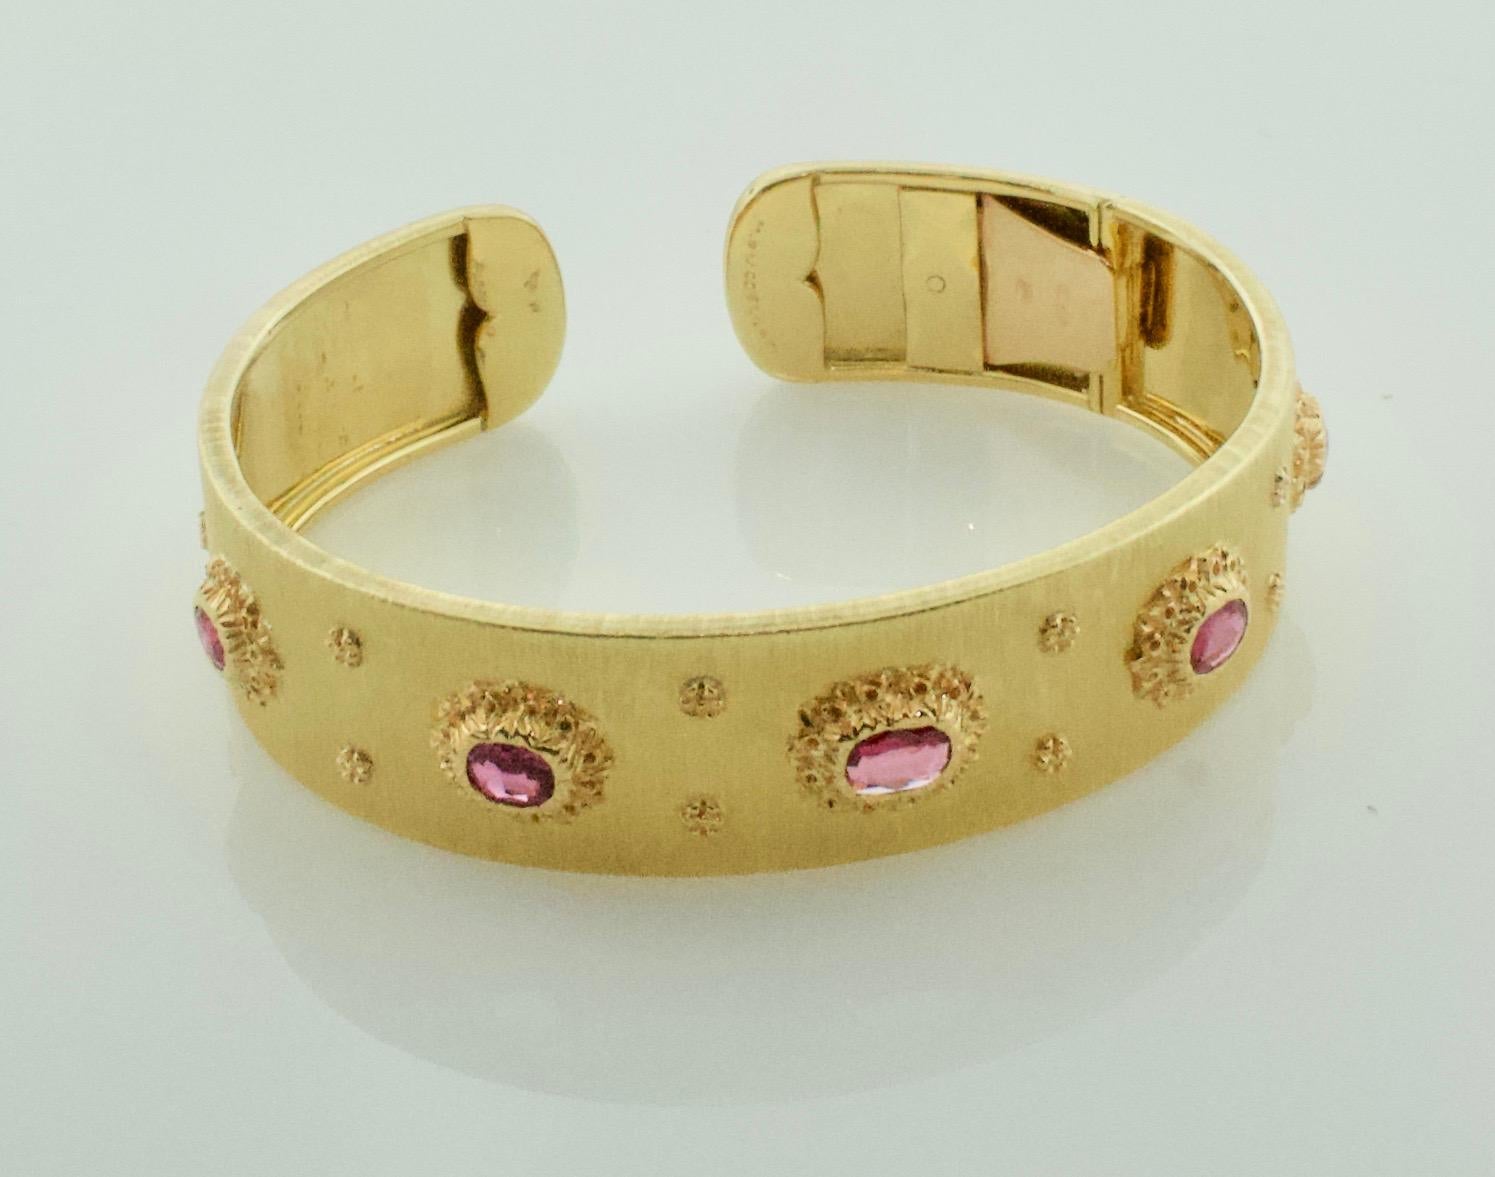 Mario Buccellati Ruby Bangle Bracelet in 18k Yellow Gold
Five Oval Cut Rubies Weighing 2.00 carats approximately   
Opens with Spring Latch For Easy Wearing
Purchased From a Renowned Hollywood Movie Family

In 1919 Mario Buccellati opened his first